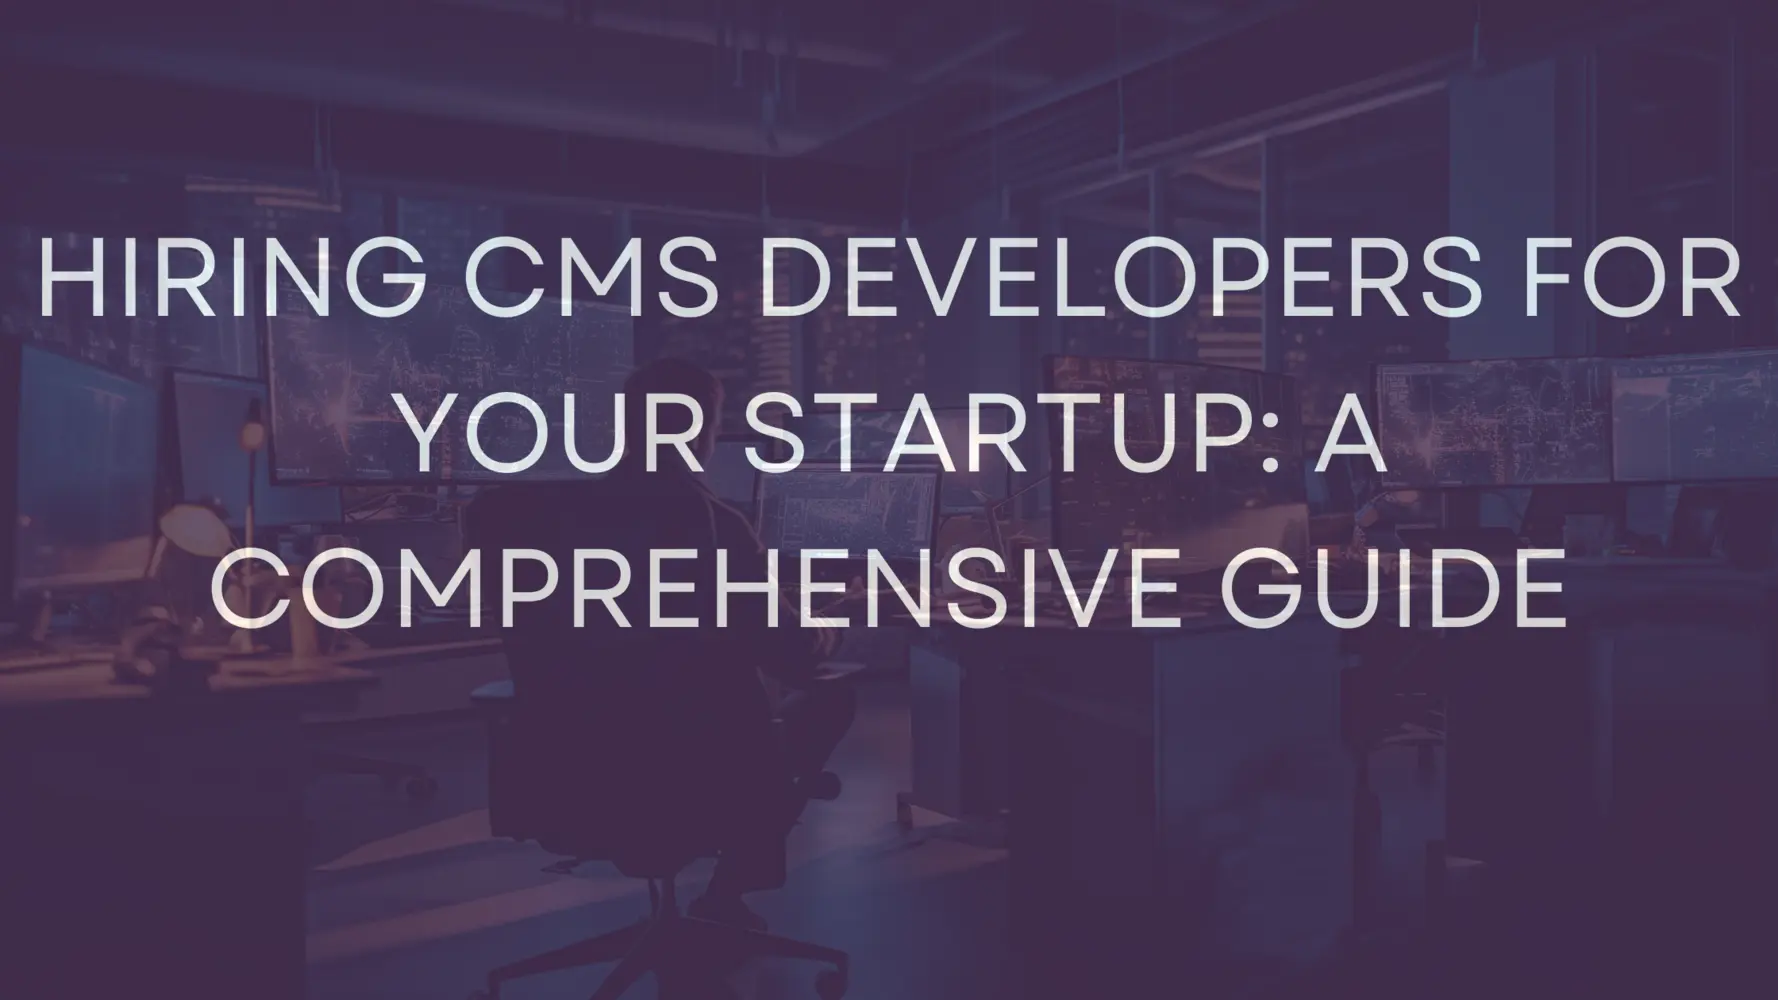 How to hire cms developers